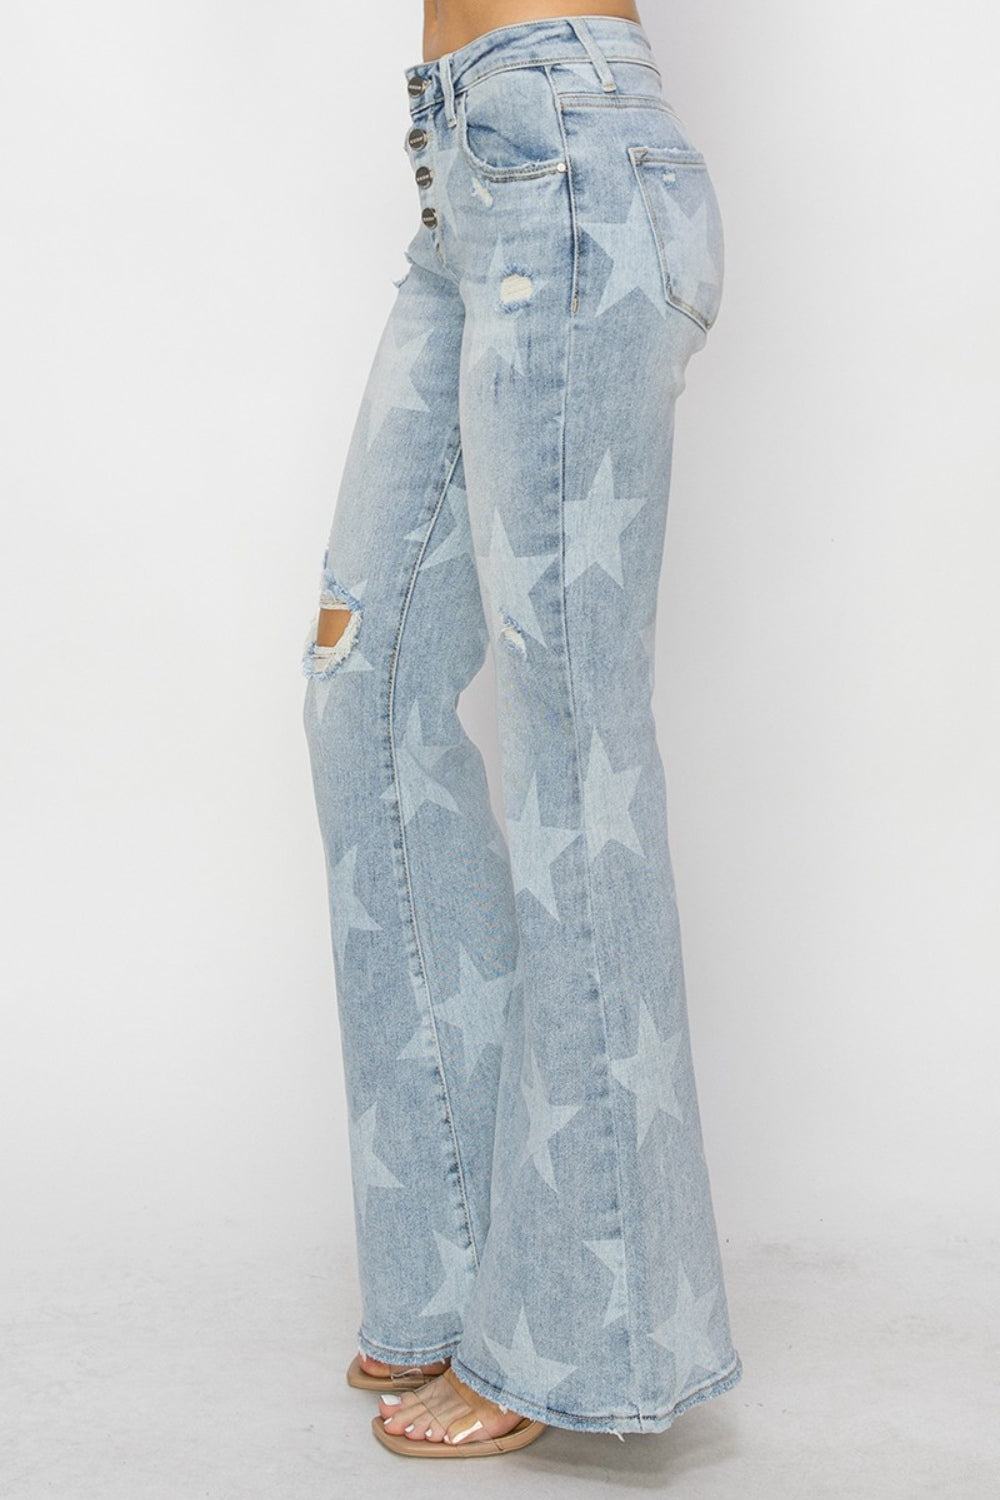 RISEN Mid Rise Button Fly Star Print Flare Jeans